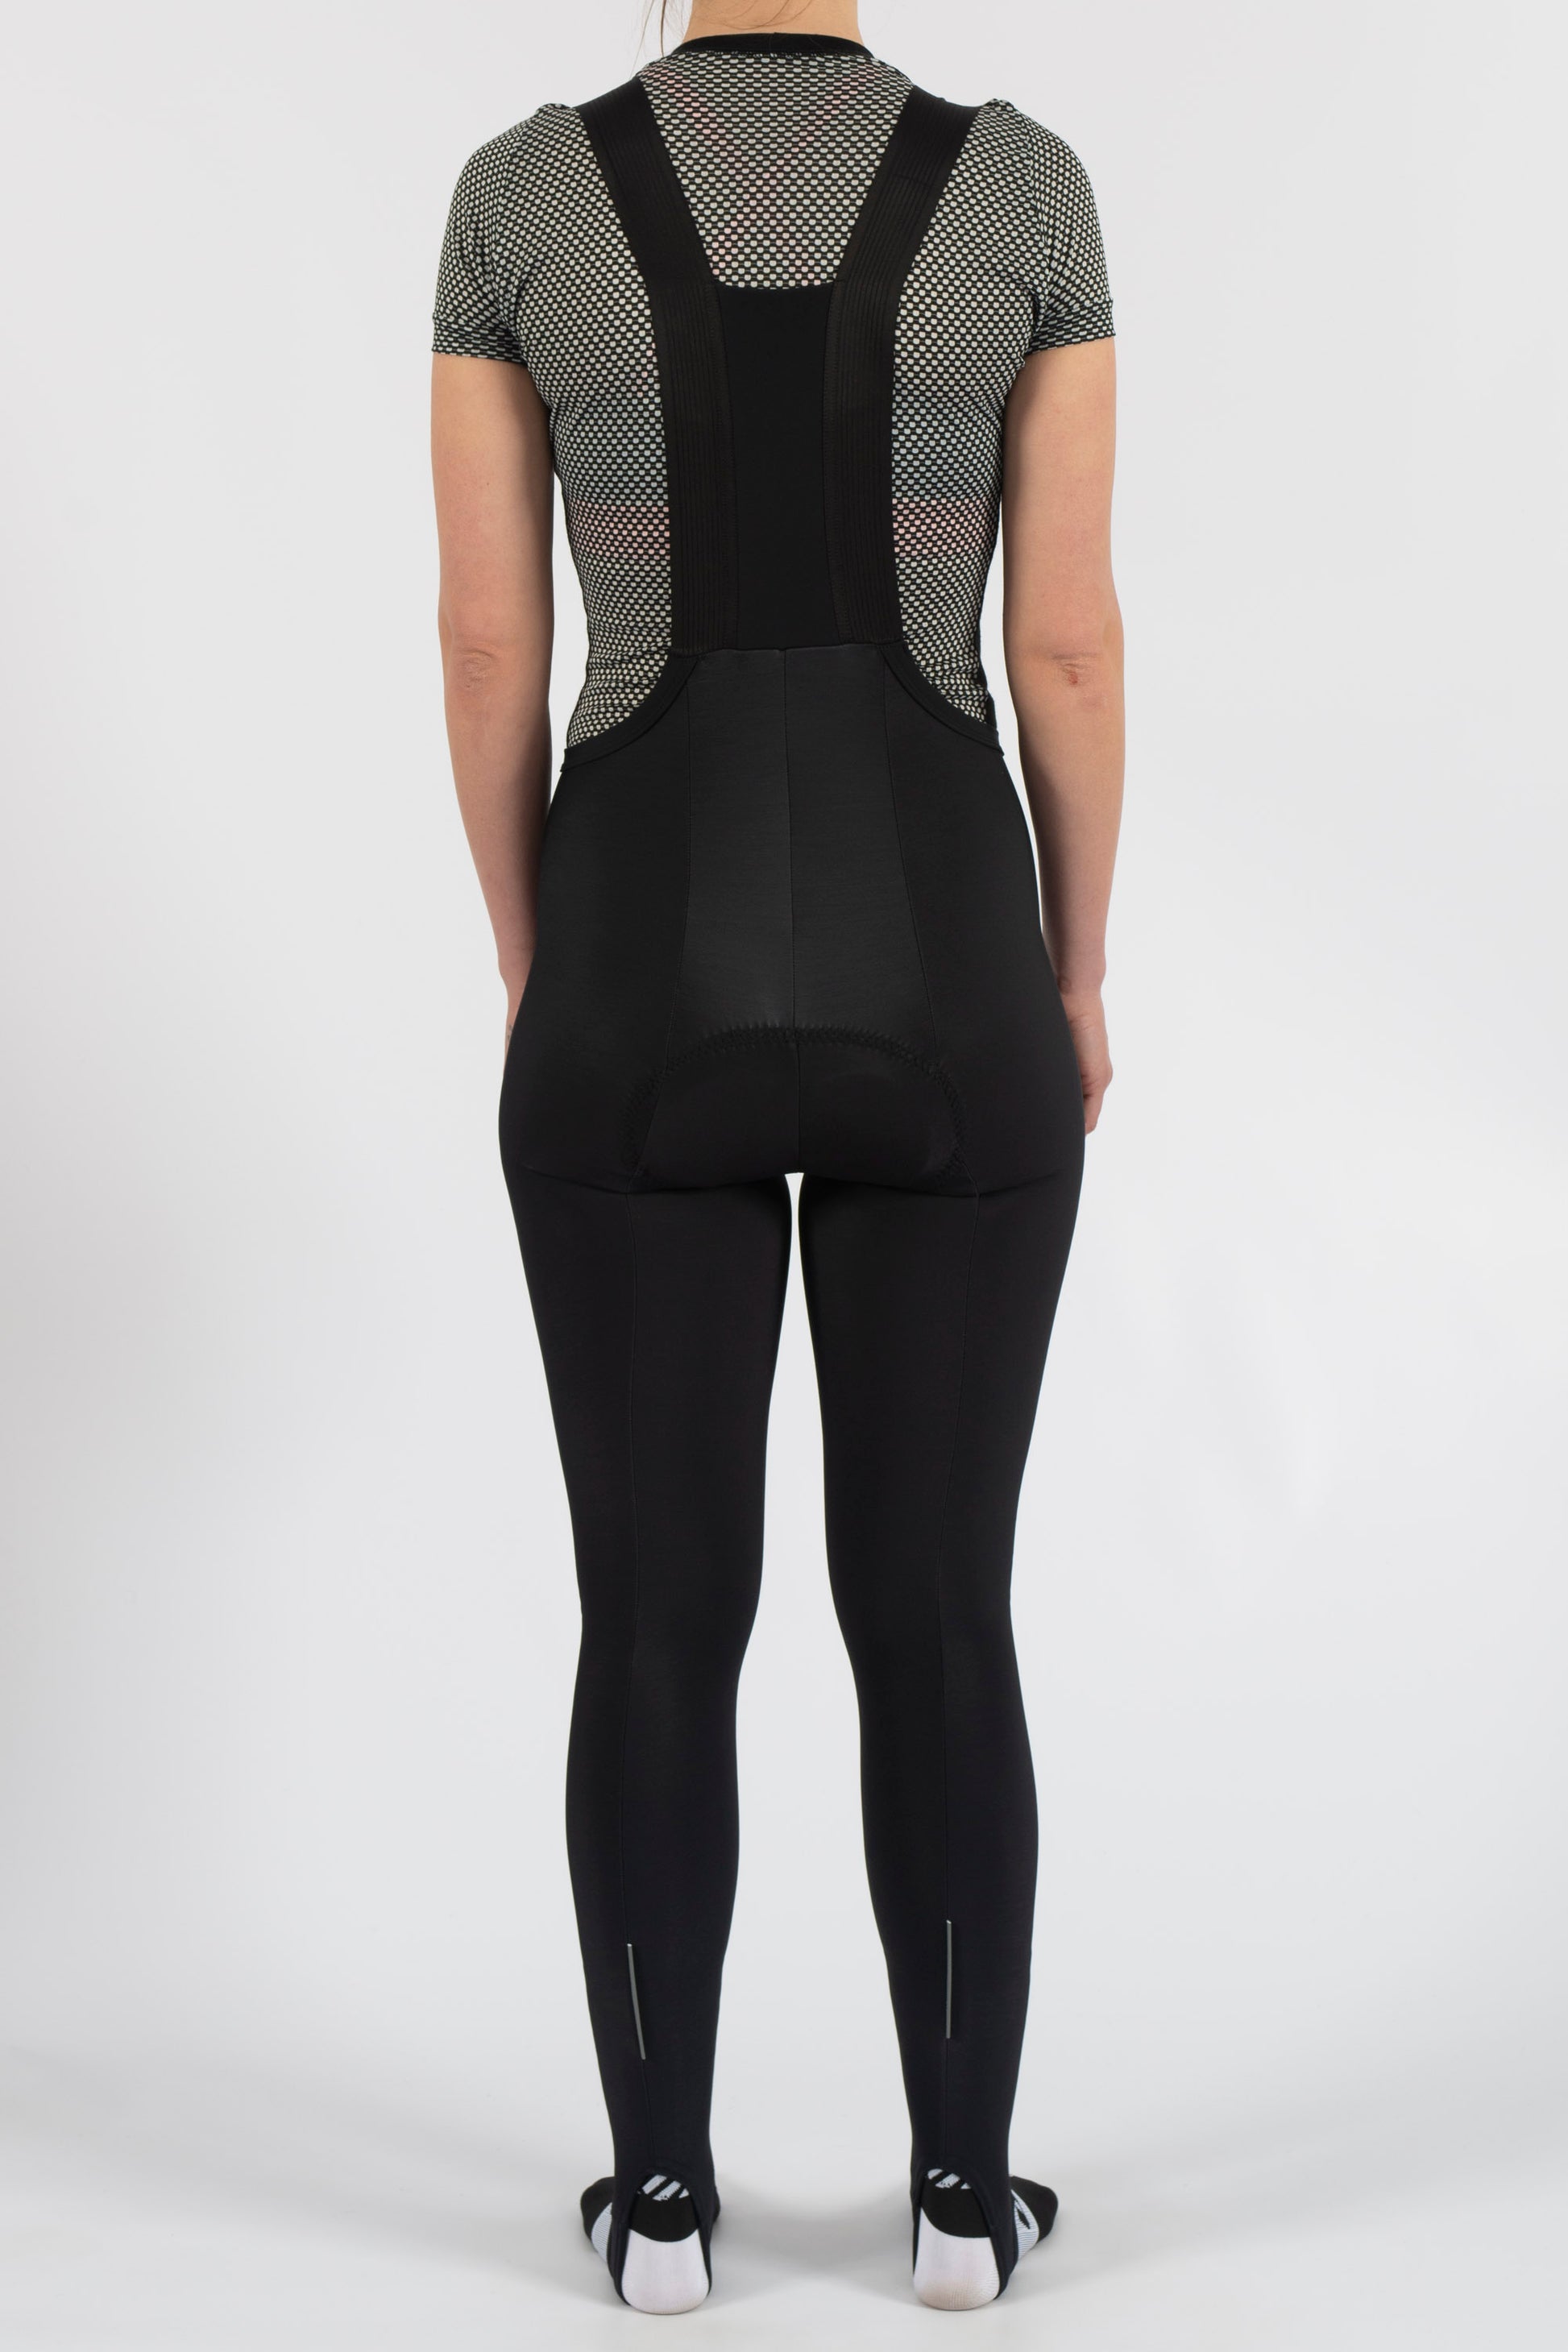 Women's Thermal Bibtights - Lusso Cycle Wear